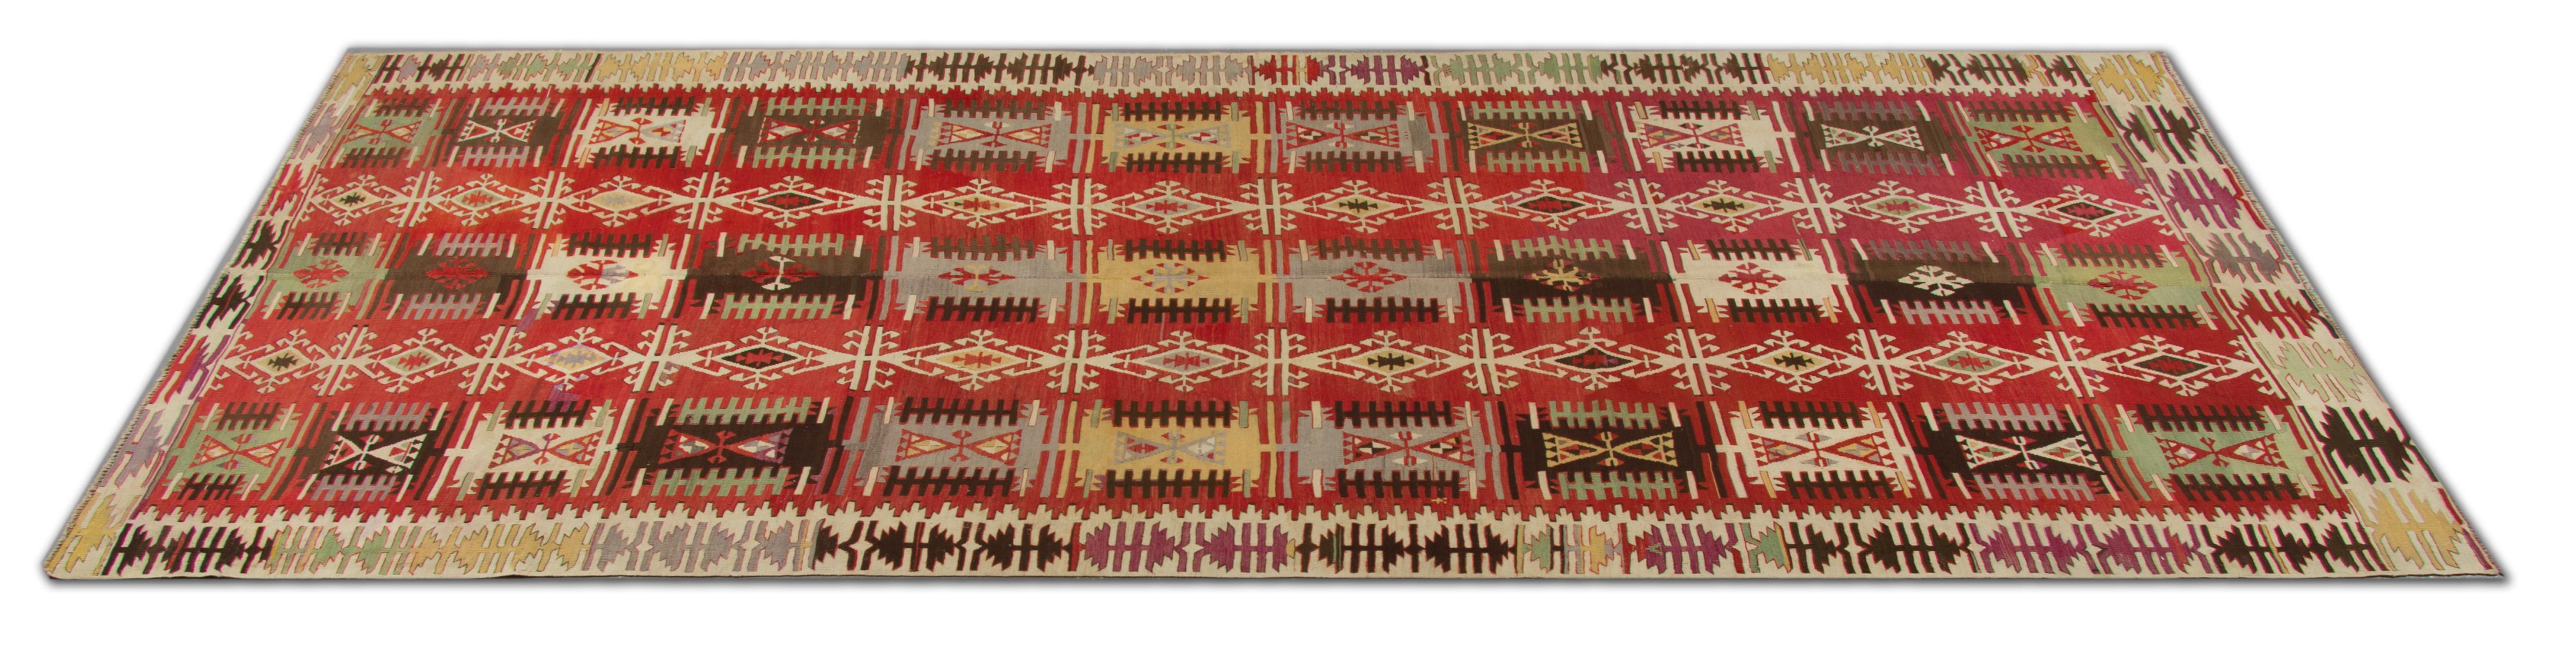 This kilim rug is a rare beautiful handmade carpet antique rug from Konya, which is located in the heart of Turkey. This large rug is in excellent condition. The workshop Kilims of Konya is mostly known for its distinctive geometric rug designs